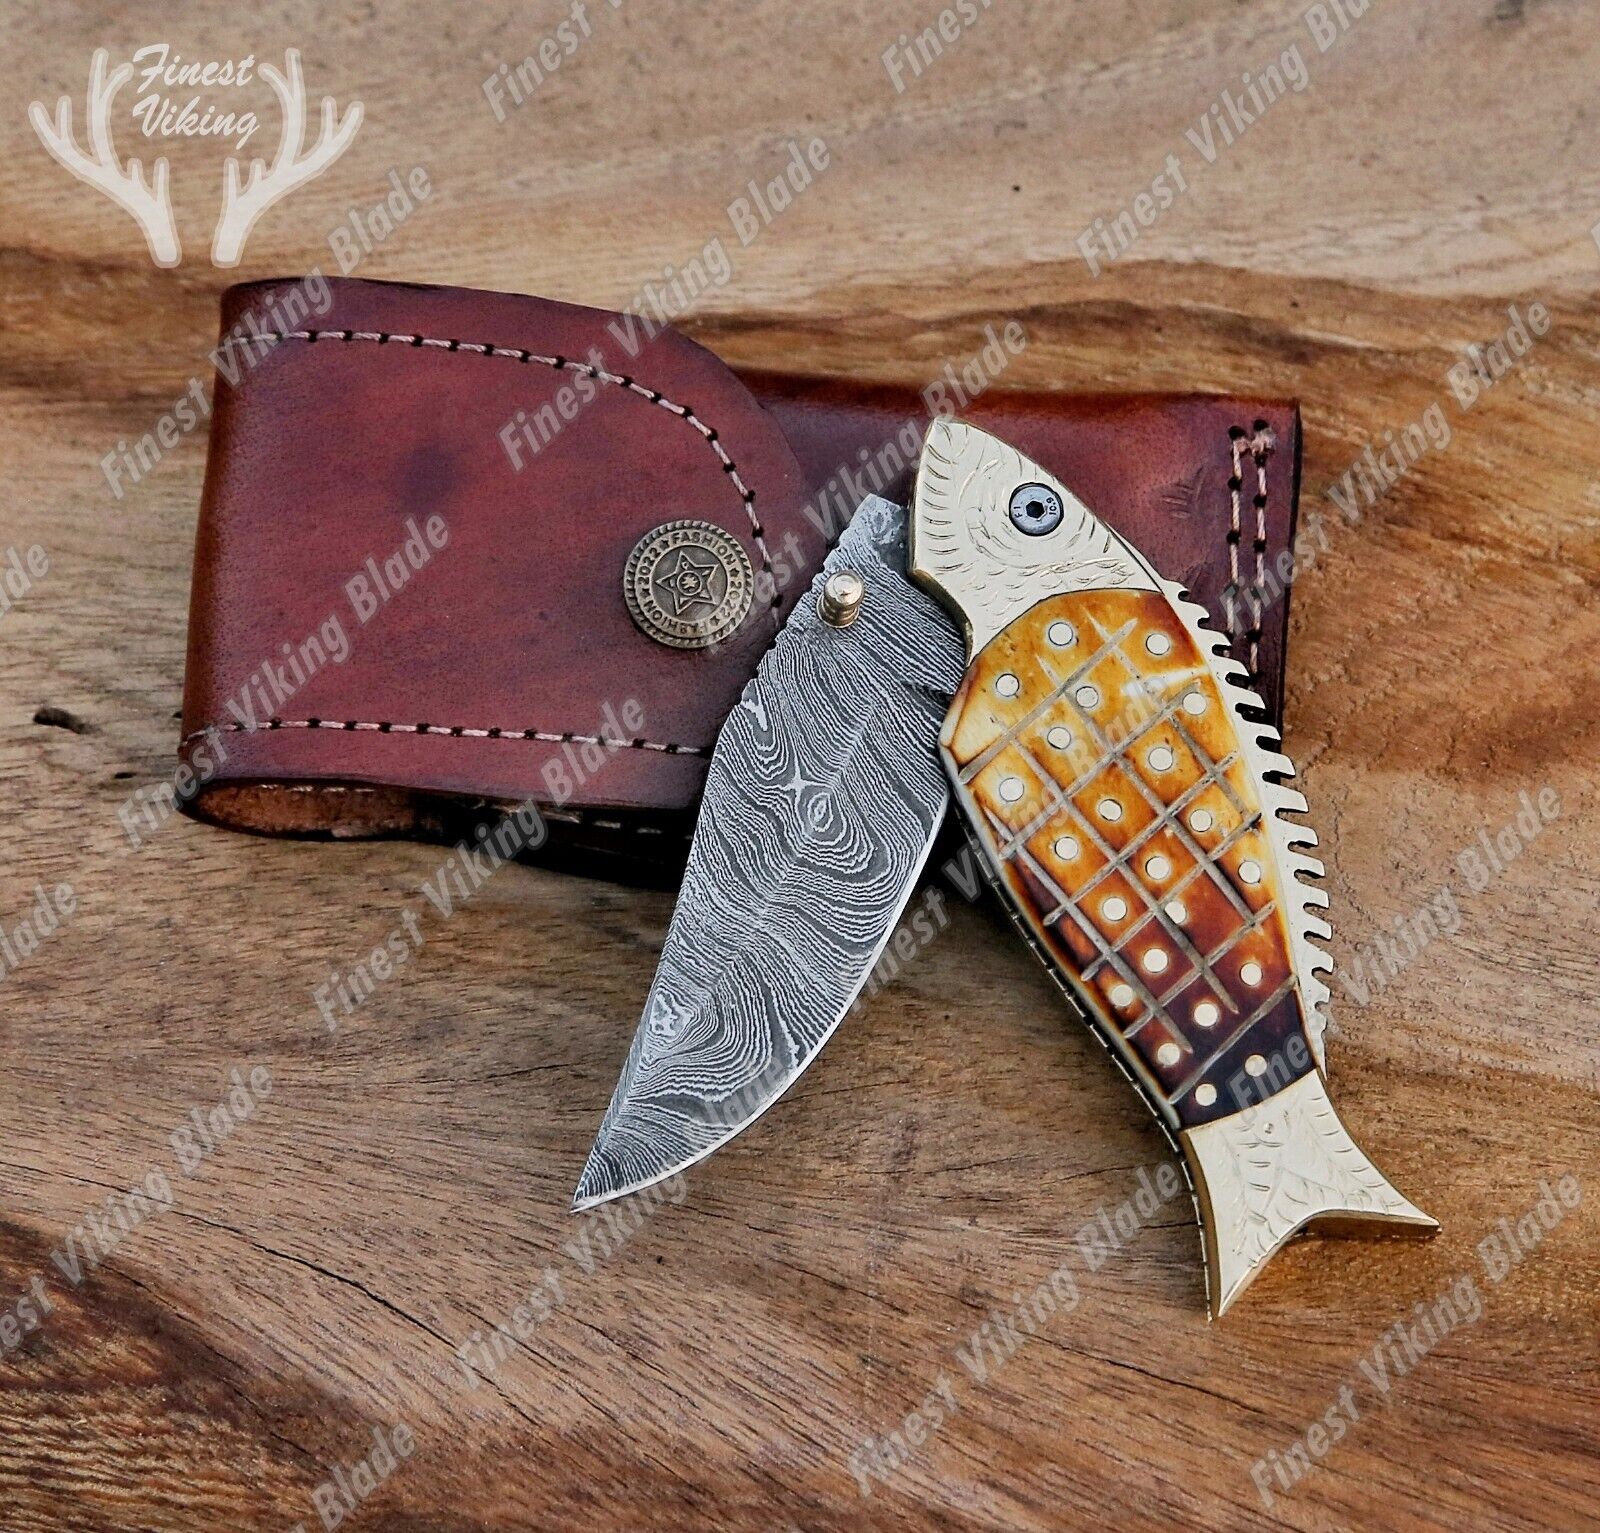 Unique Handmade Damascus Folding Pocket Knife Personalized Gift for Any Occasion